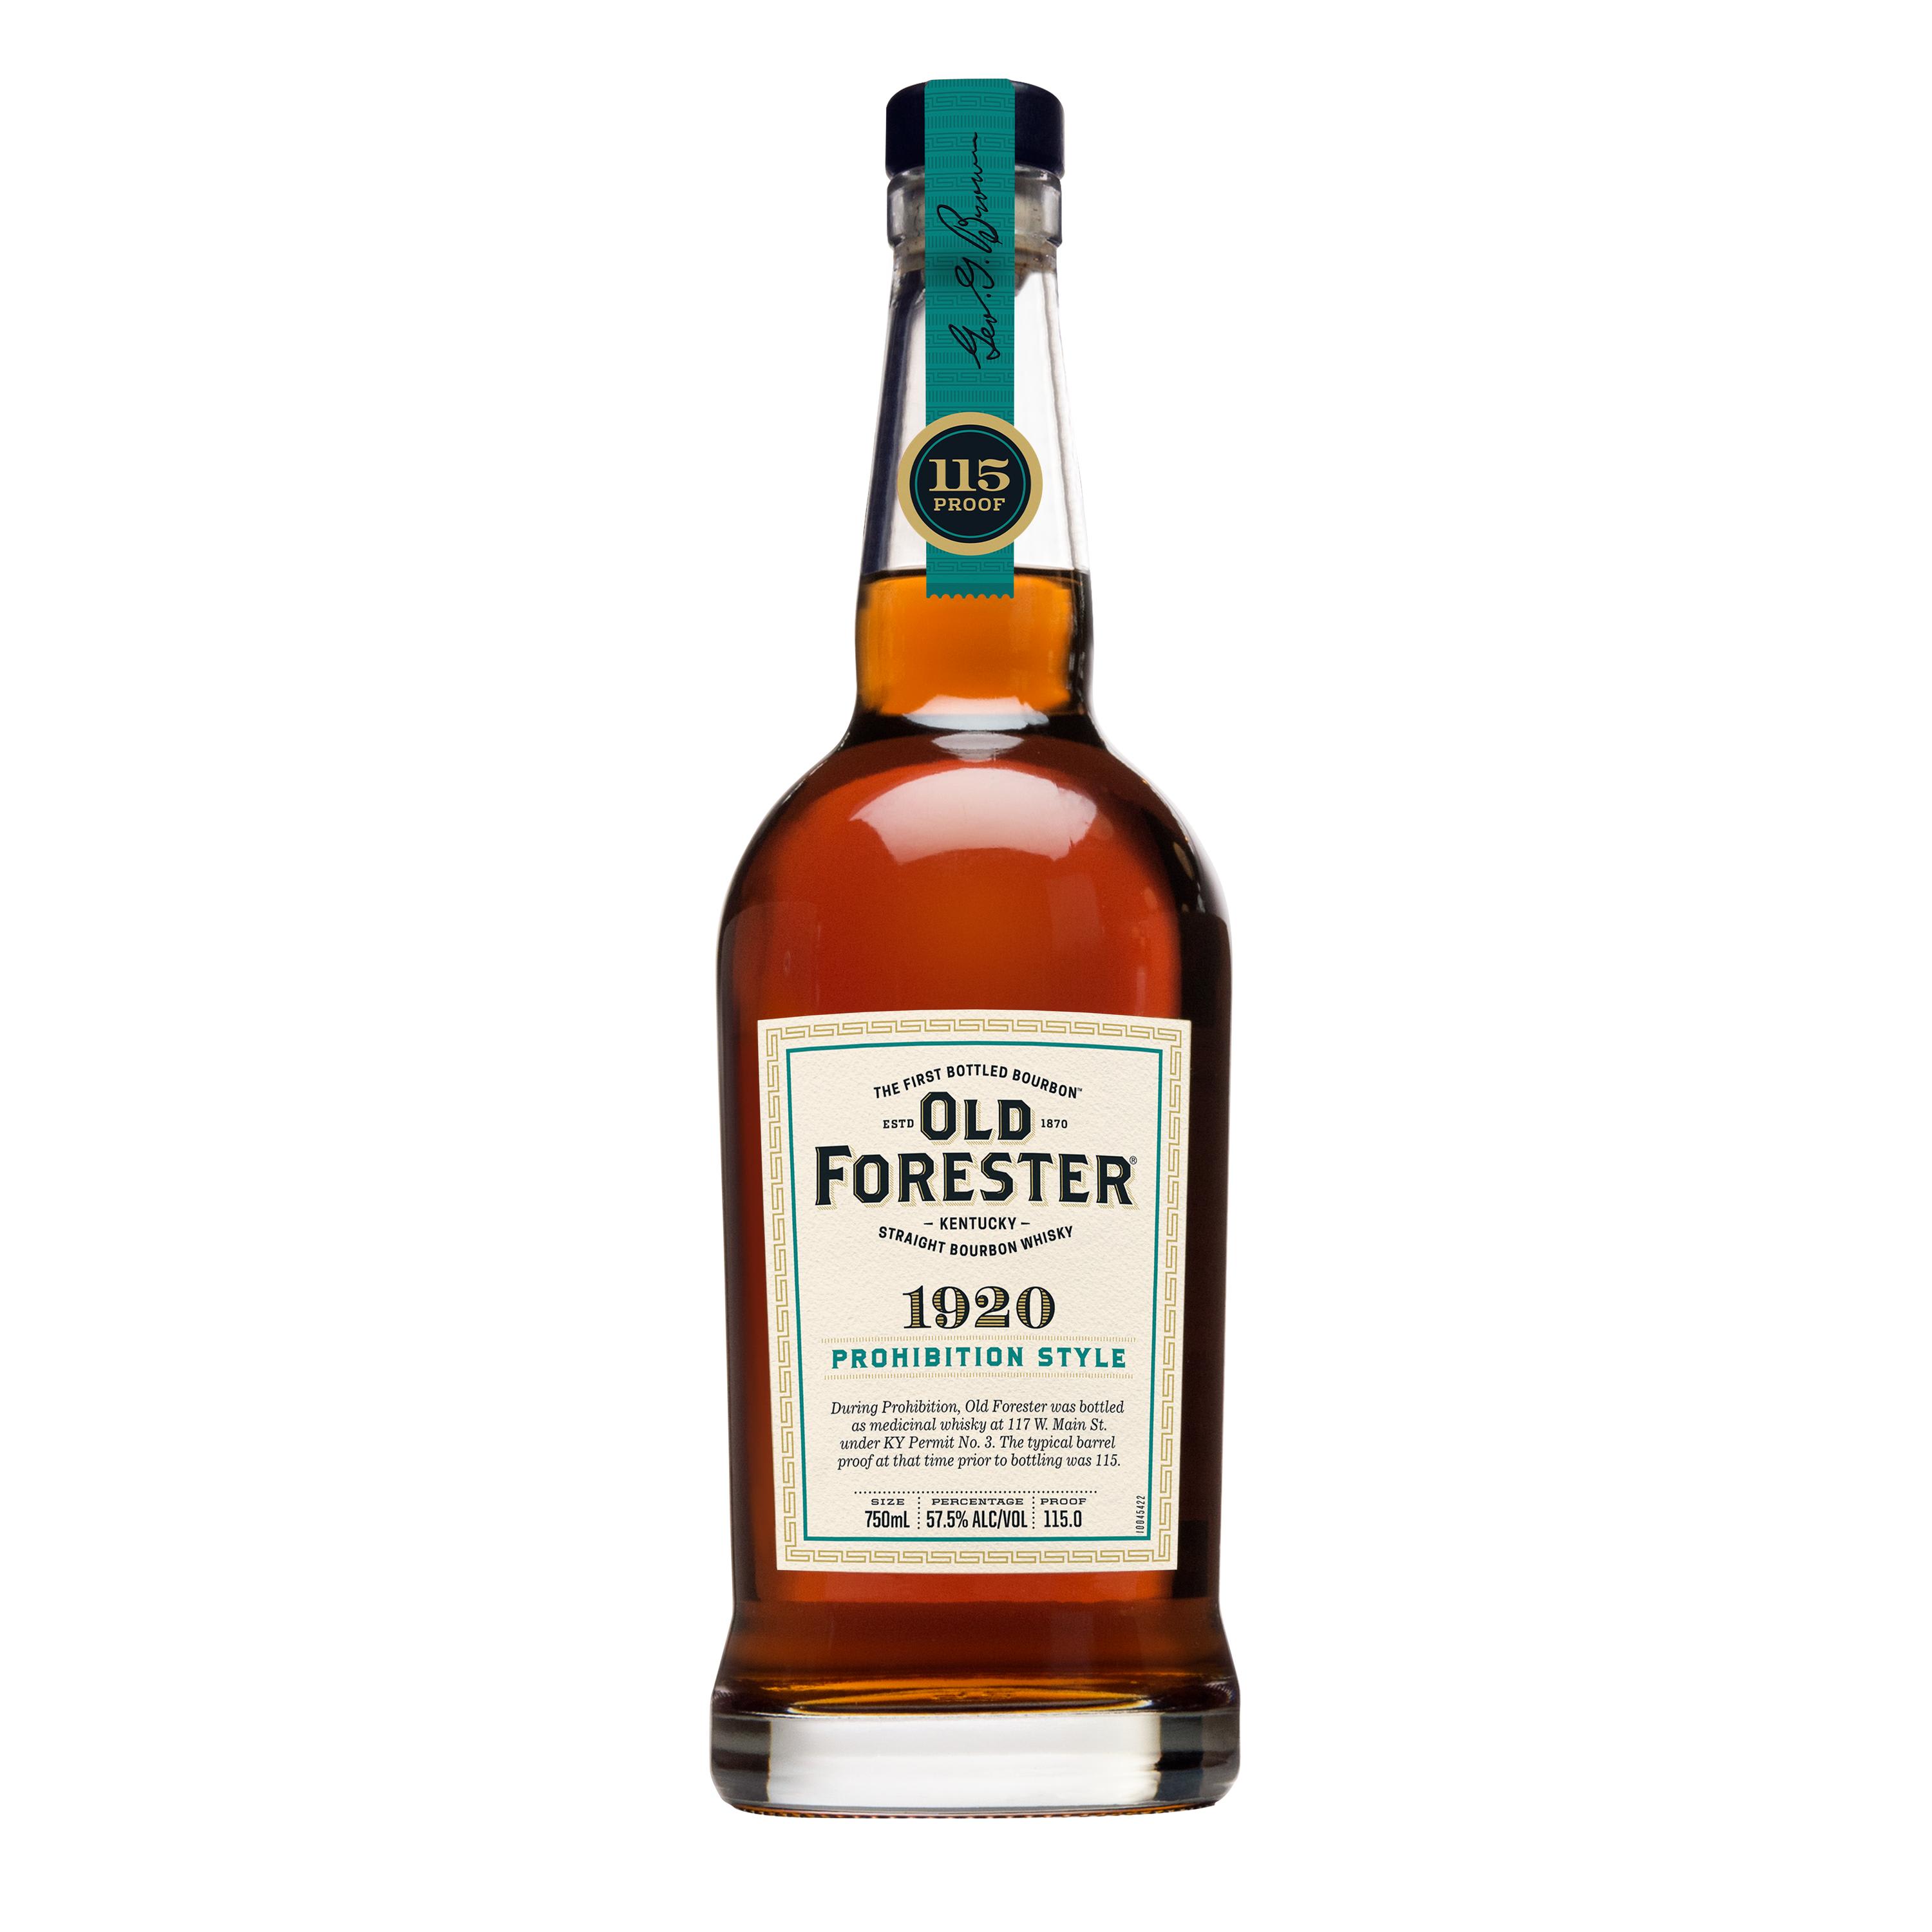 Old Forester, 1920 Prohibition Style, Kentucky Str